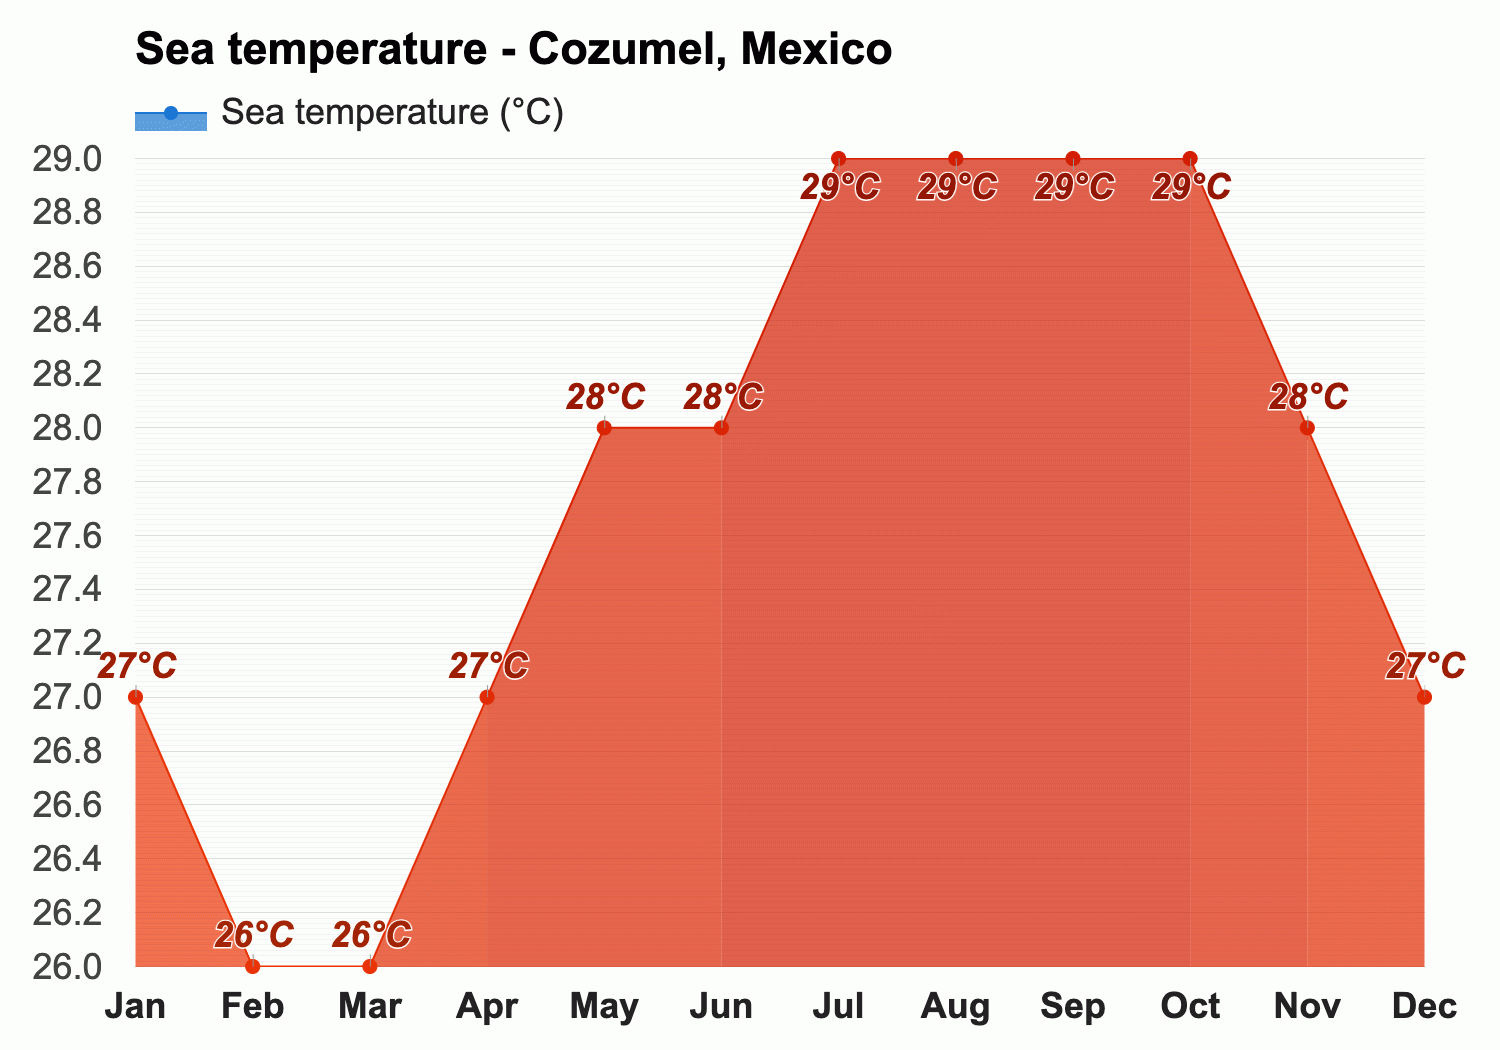 Cozumel, Mexico - Climate & Monthly weather forecast